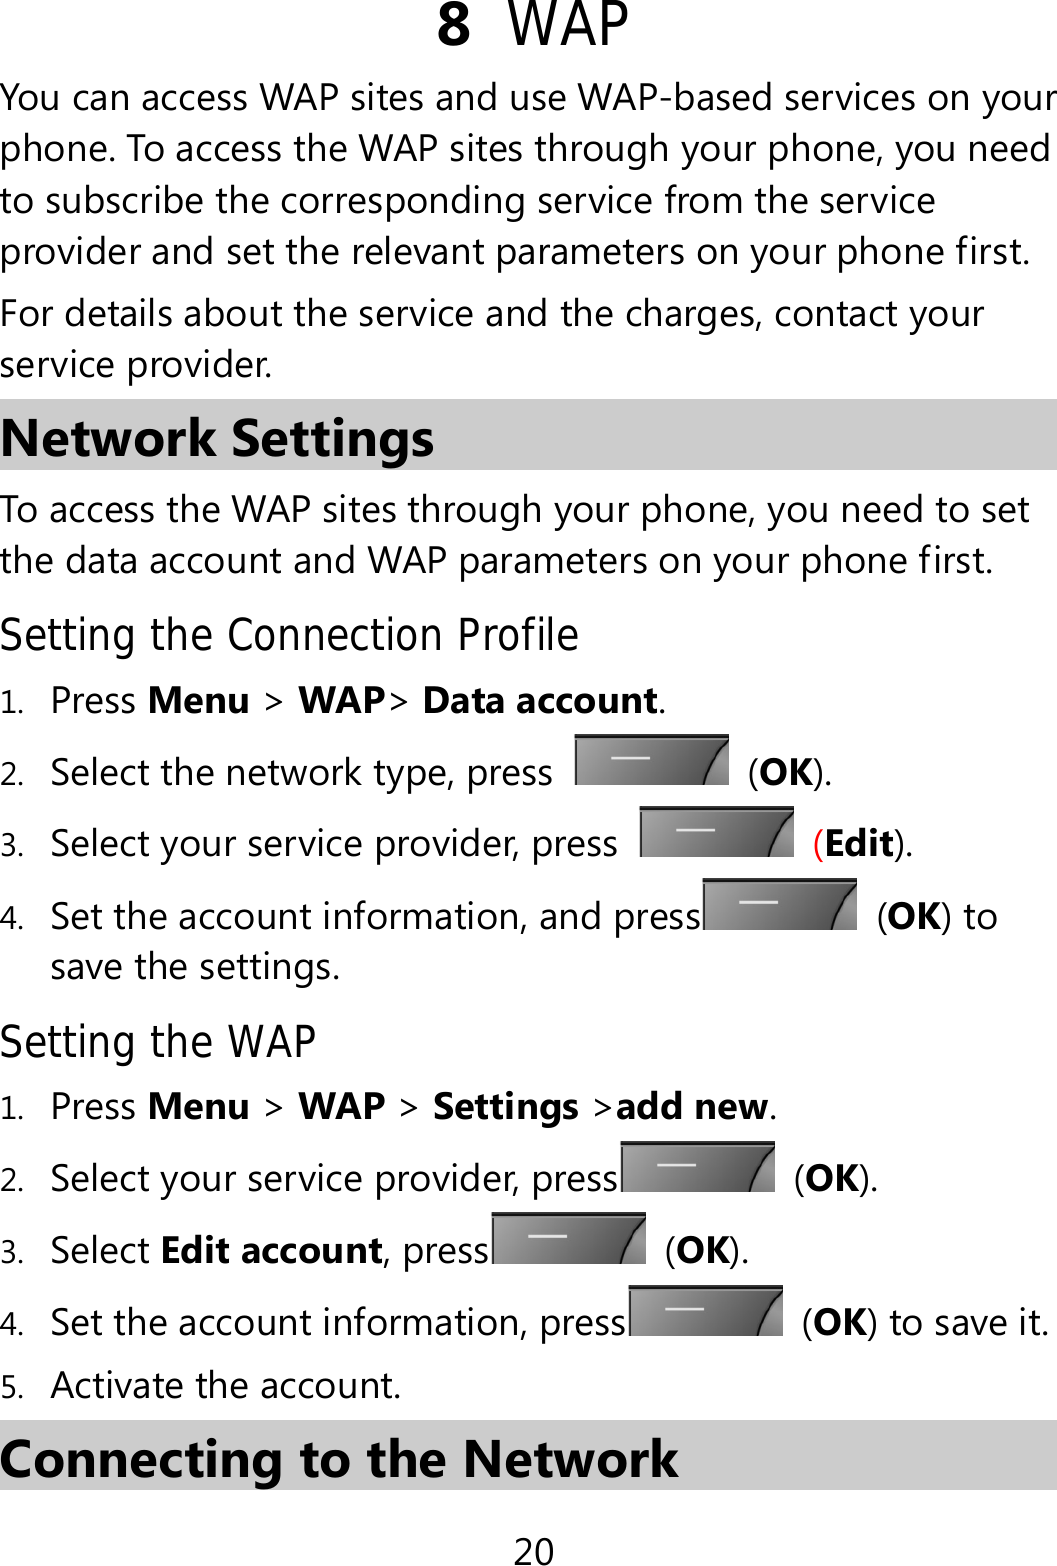 20 8  WAP You can access WAP sites and use WAP-based services on your phone. To access the WAP sites through your phone, you need to subscribe the corresponding service from the service provider and set the relevant parameters on your phone first.   For details about the service and the charges, contact your service provider. Network Settings To access the WAP sites through your phone, you need to set the data account and WAP parameters on your phone first. Setting the Connection Profile 1. Press Menu &gt; WAP&gt; Data account. 2. Select the network type, press   (OK). 3. Select your service provider, press   (Edit). 4. Set the account information, and press  (OK) to save the settings. Setting the WAP 1. Press Menu &gt; WAP &gt; Settings &gt;add new. 2. Select your service provider, press  (OK). 3. Select Edit account, press  (OK). 4. Set the account information, press  (OK) to save it. 5. Activate the account. Connecting to the Network 